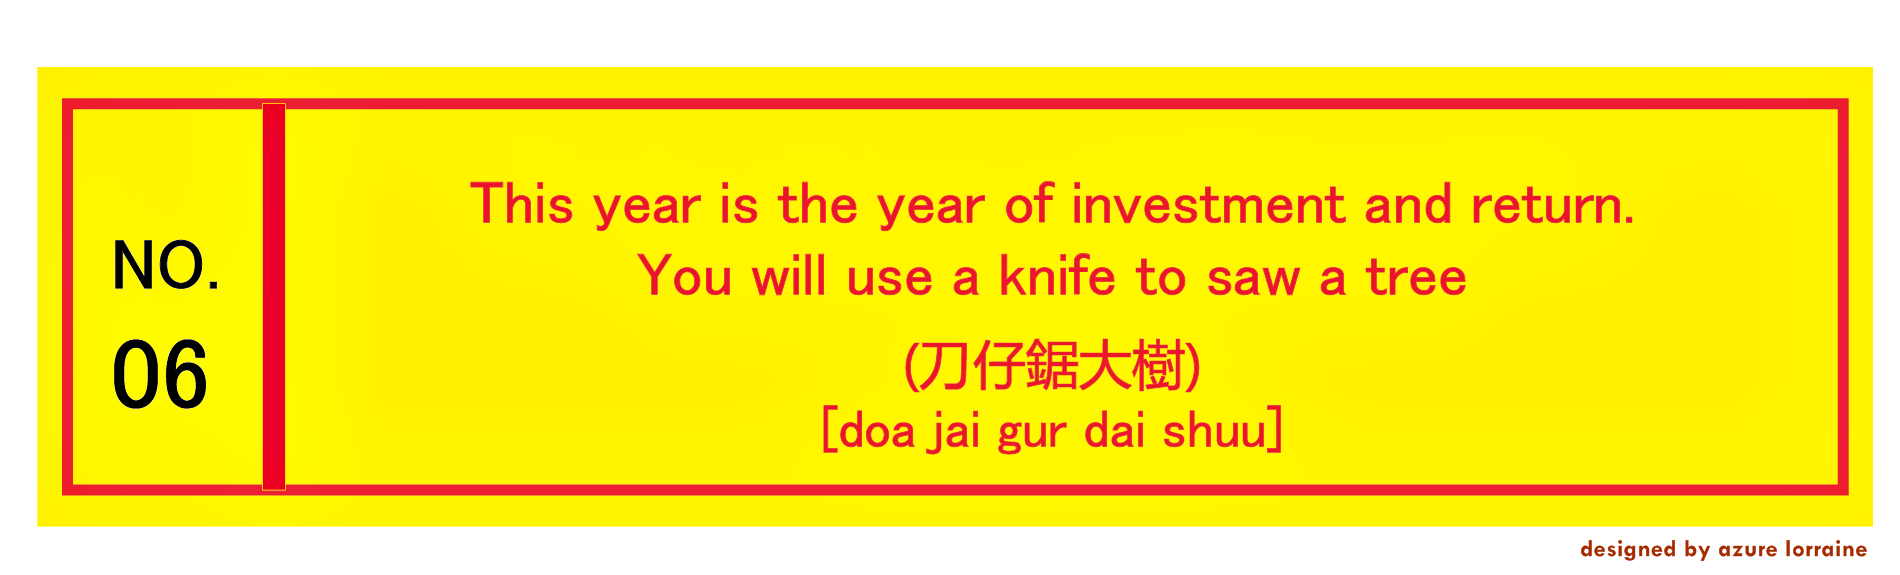 6. This year is the year of investment and return. You will use a knife to saw a tree. (刀仔鋸大樹) [doa jai gur dai shuu]